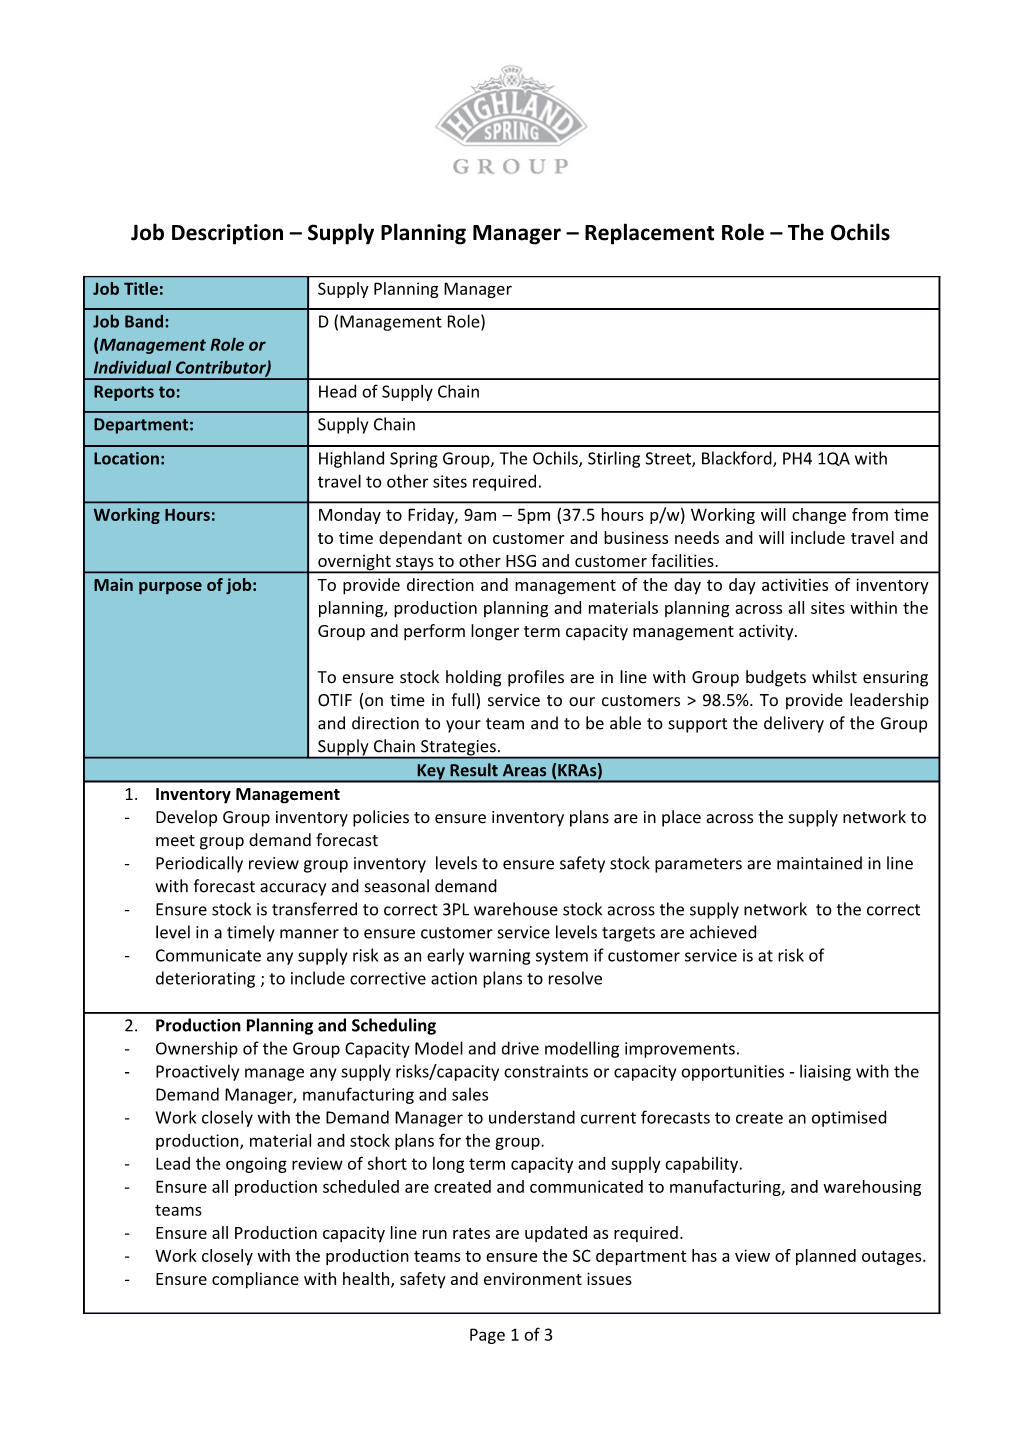 Job Description Supply Planning Manager Replacement Role the Ochils